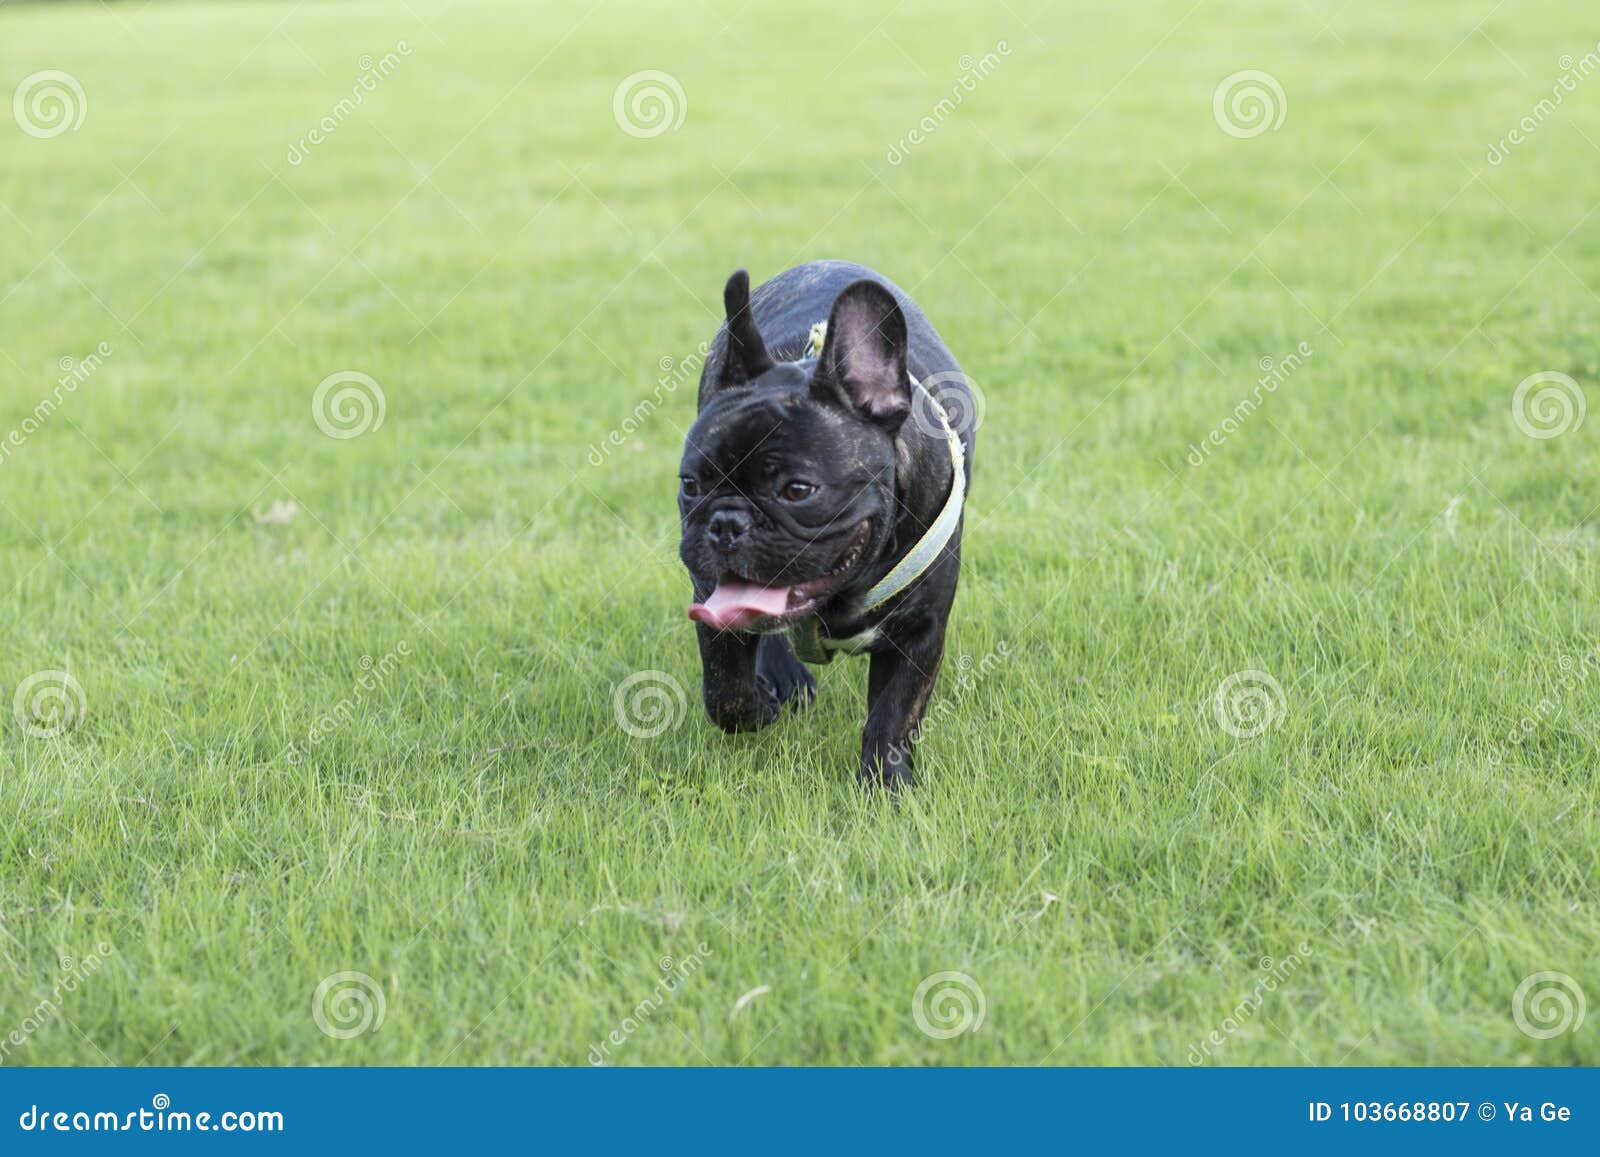 Black French Bulldog stock image. Image of grass, dogs - 103668807